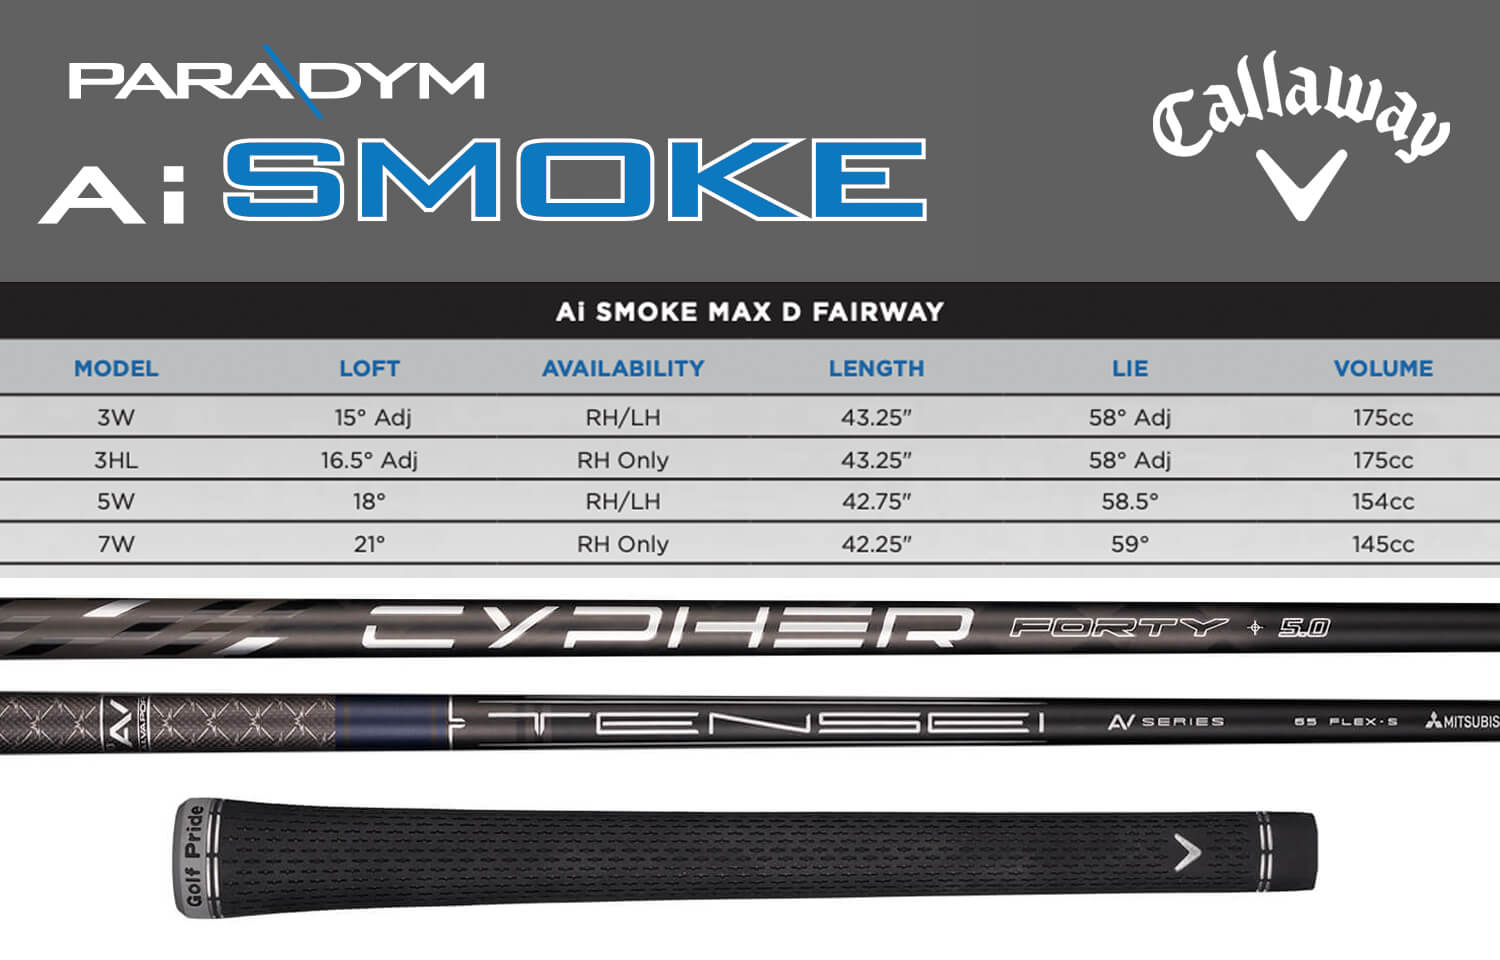 Specification for Callaway Paradym Ai Smoke Max D Golf Fairway Wood